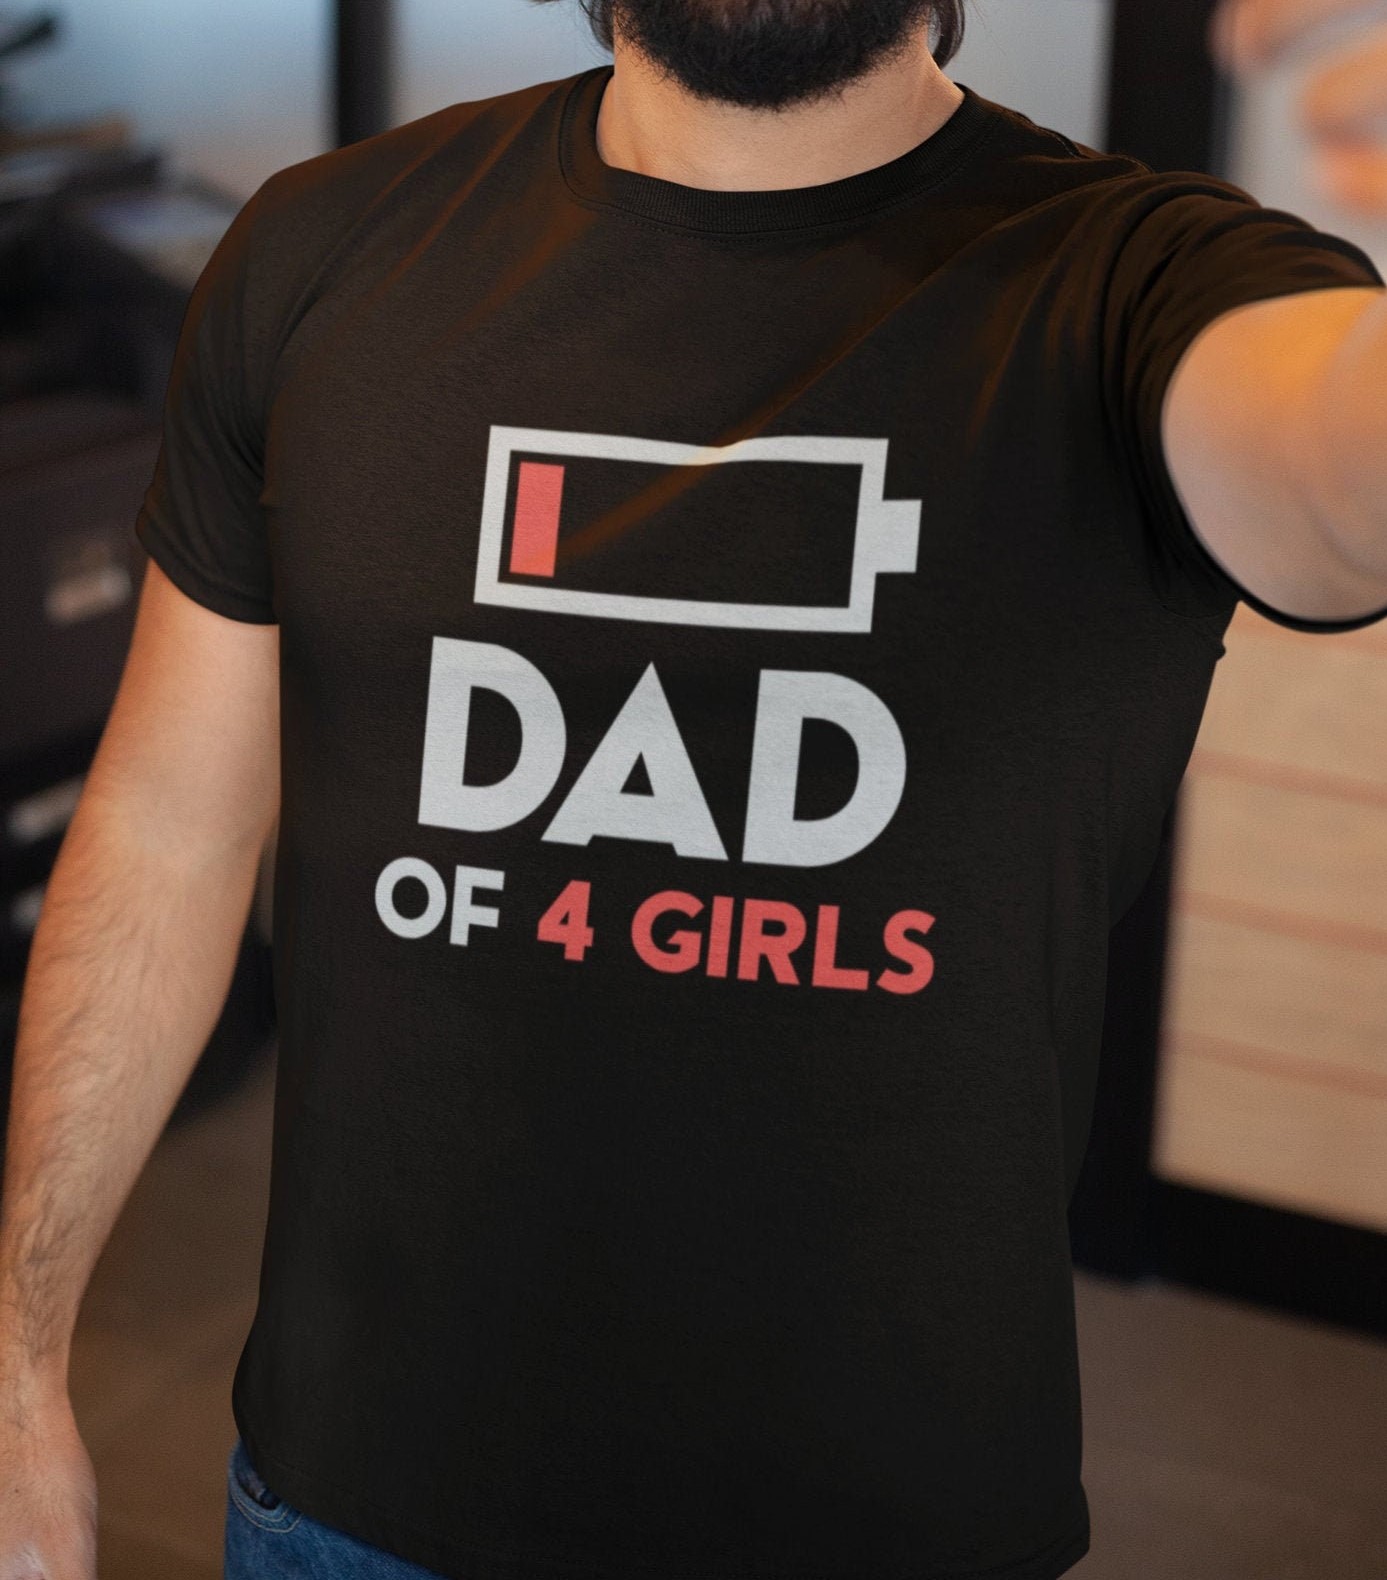 Dad Of 4 Girls Funny Father’s Day Unisex T-Shirt